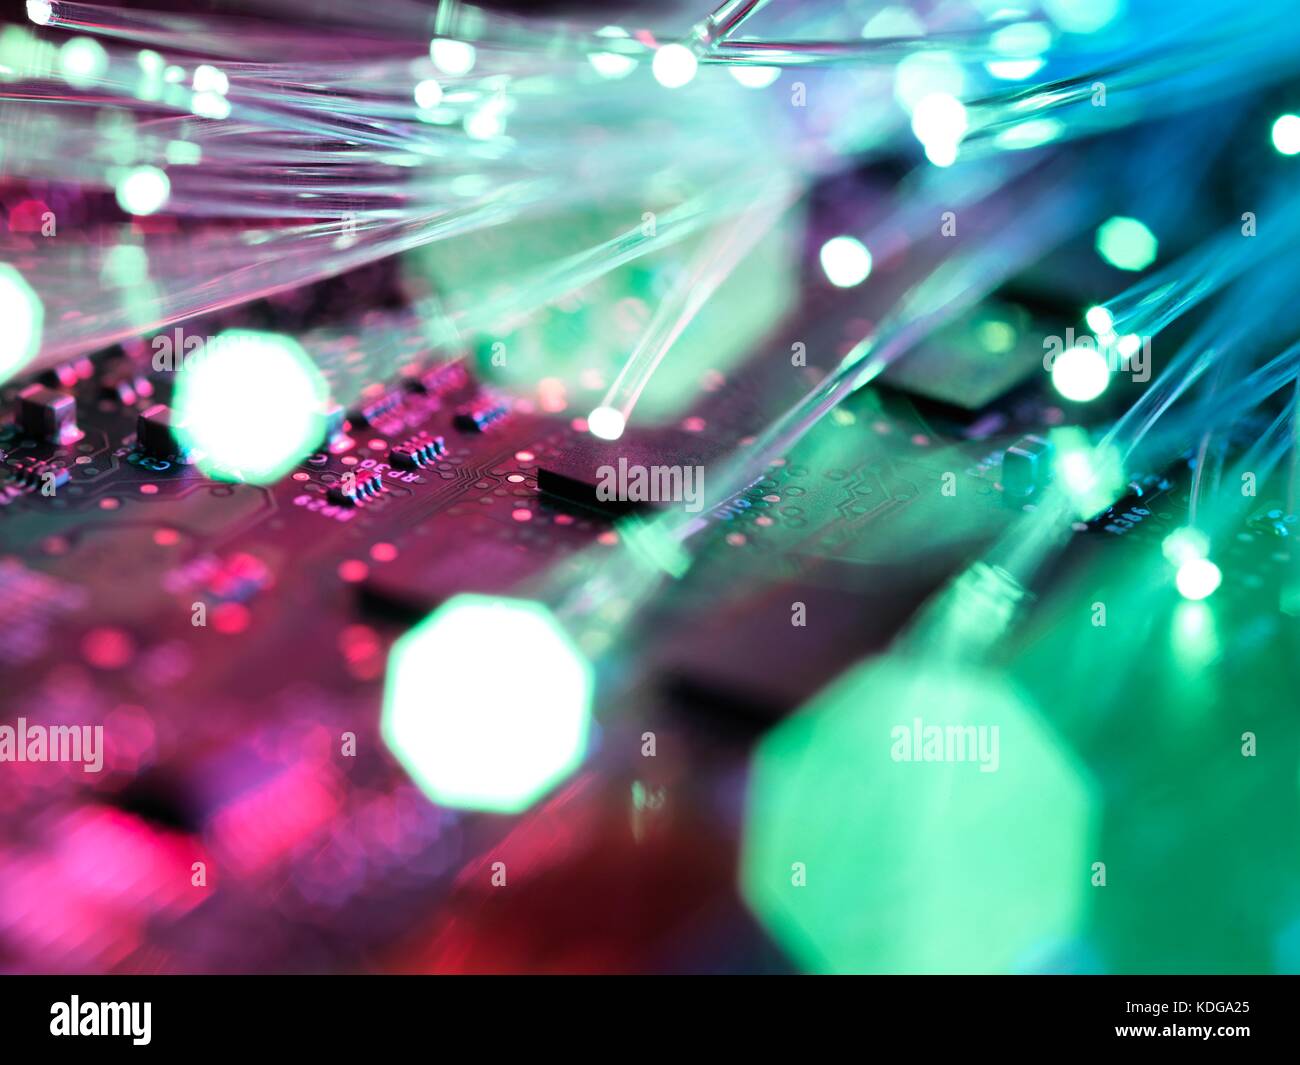 Fibre optic strands carrying data, with electronics in the background. Stock Photo